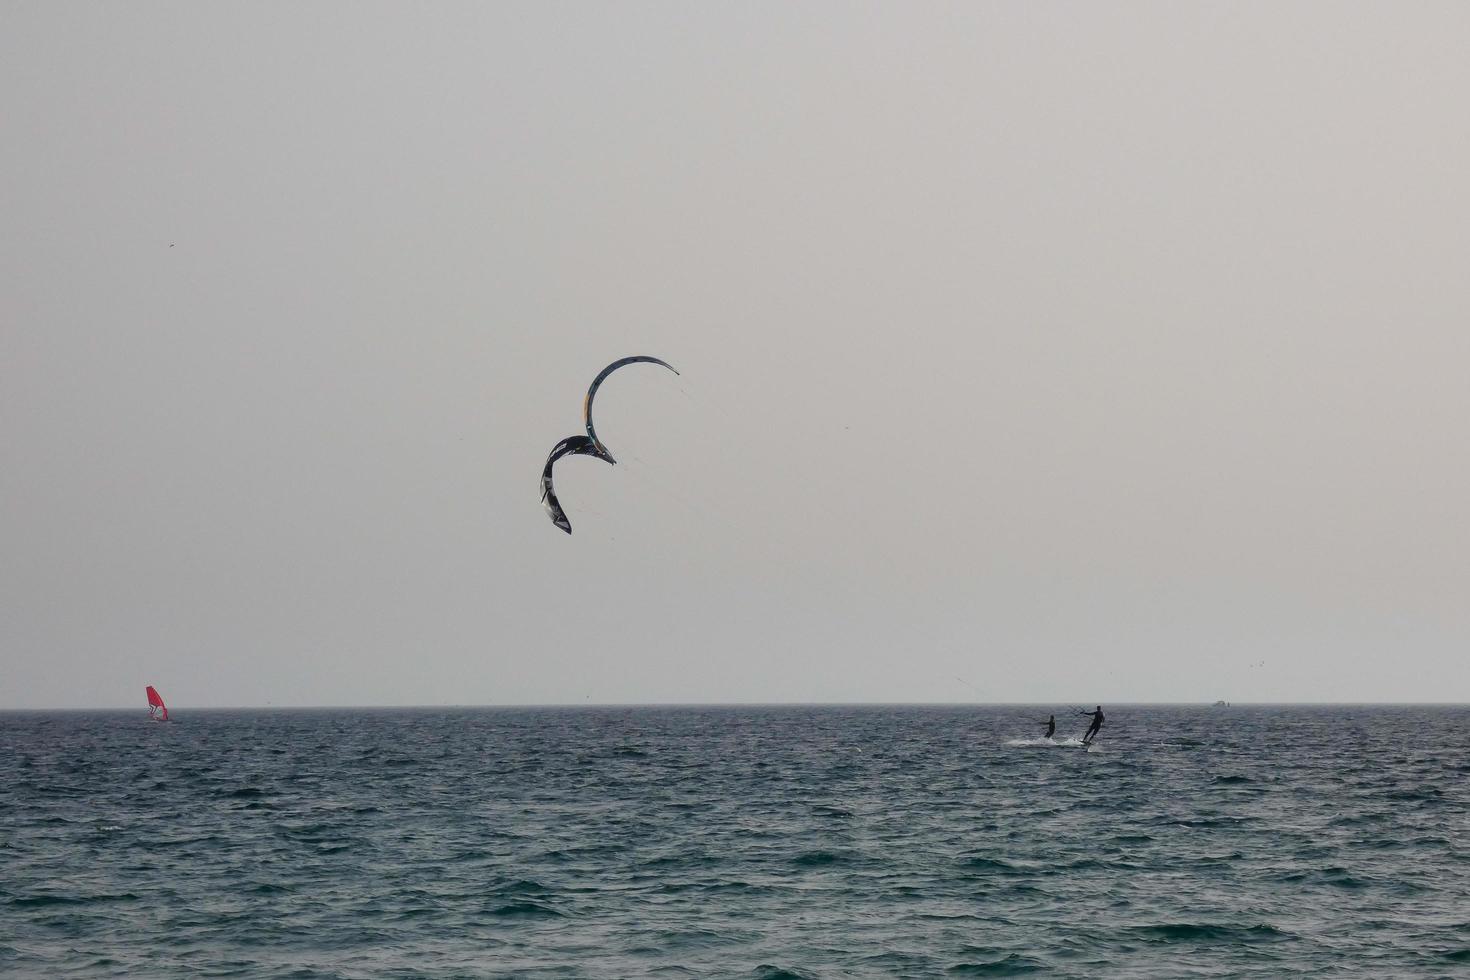 windsurfing, kitesurfing, water and wind sports powered by sails or kites photo